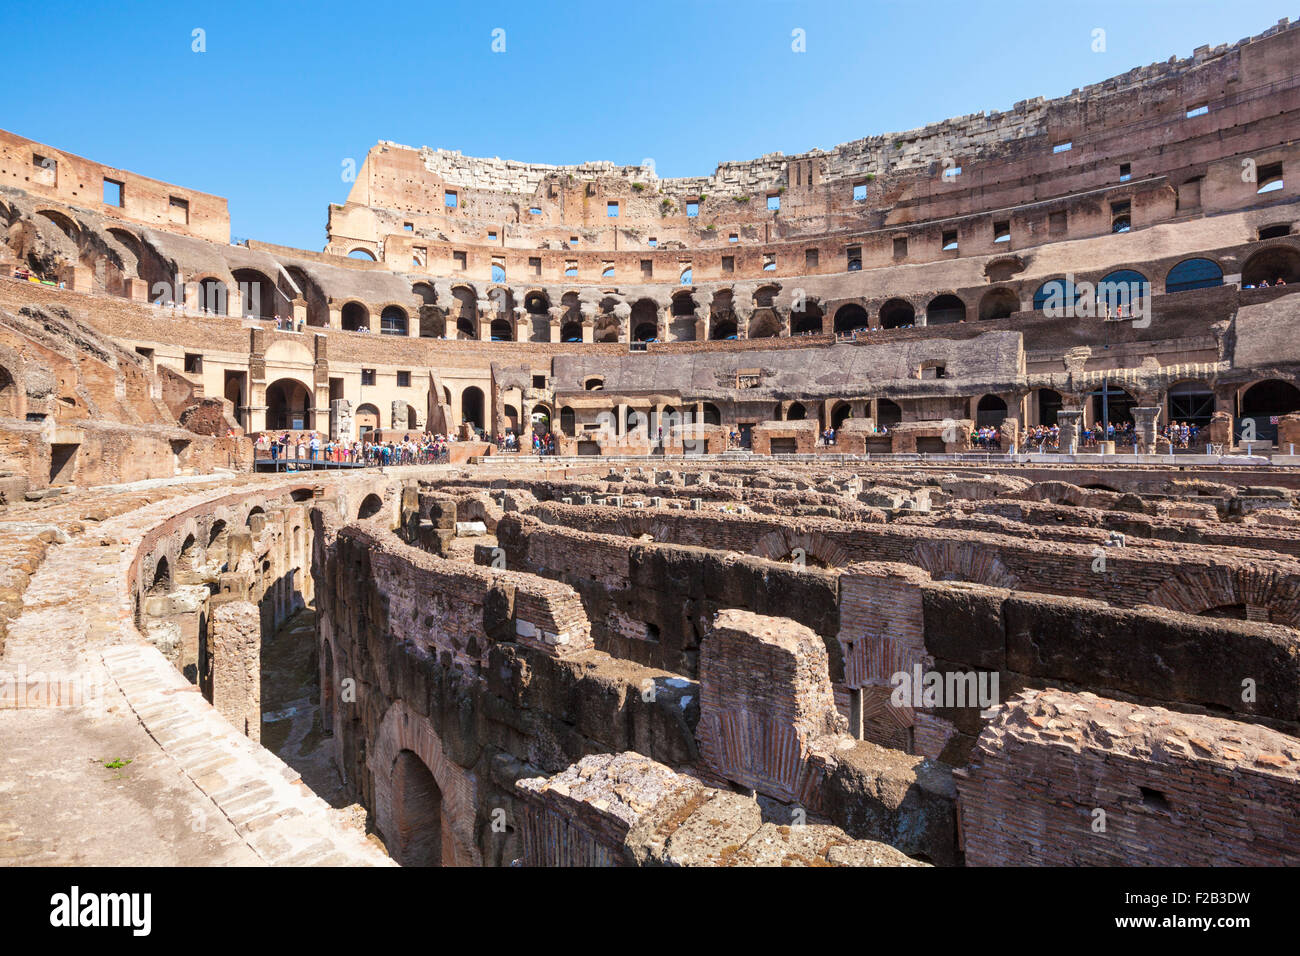 Inside the Rome Colosseum or Flavian Amphitheatre looking across the excavations of the arena Rome Lazio Region Italy EU Europe Stock Photo